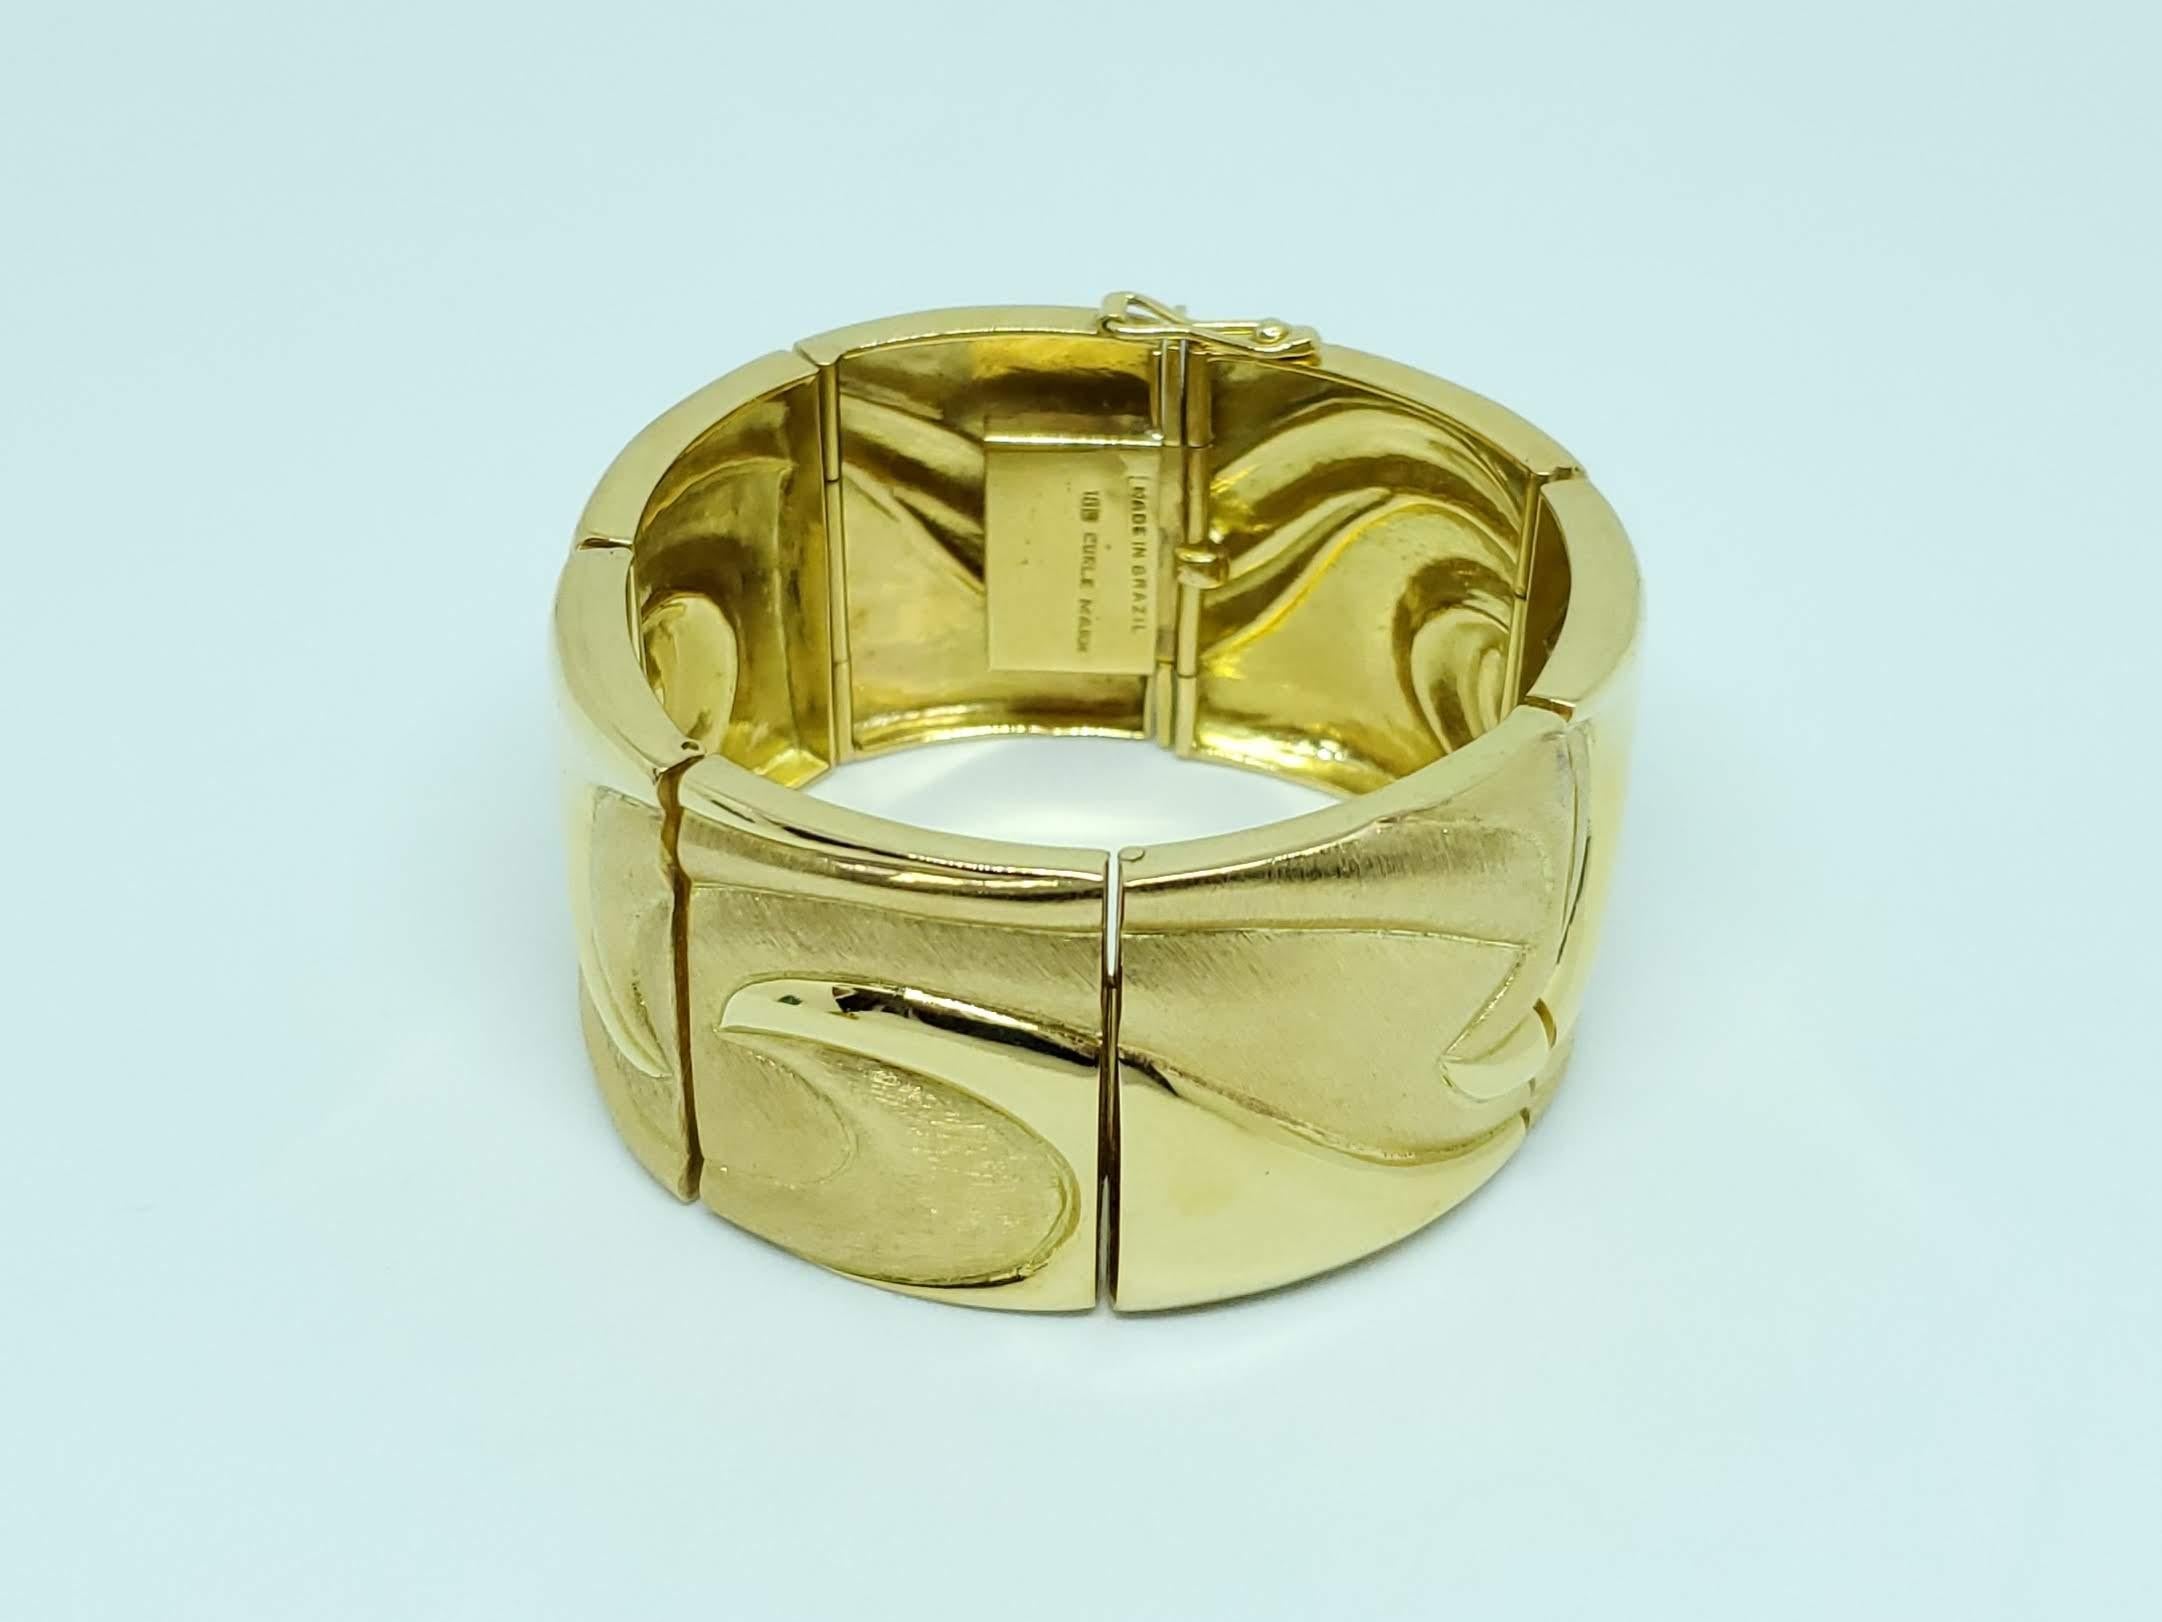 Thanks for taking a look at this late 1980's Burle Marx Wide Gold Bracelet. We say 